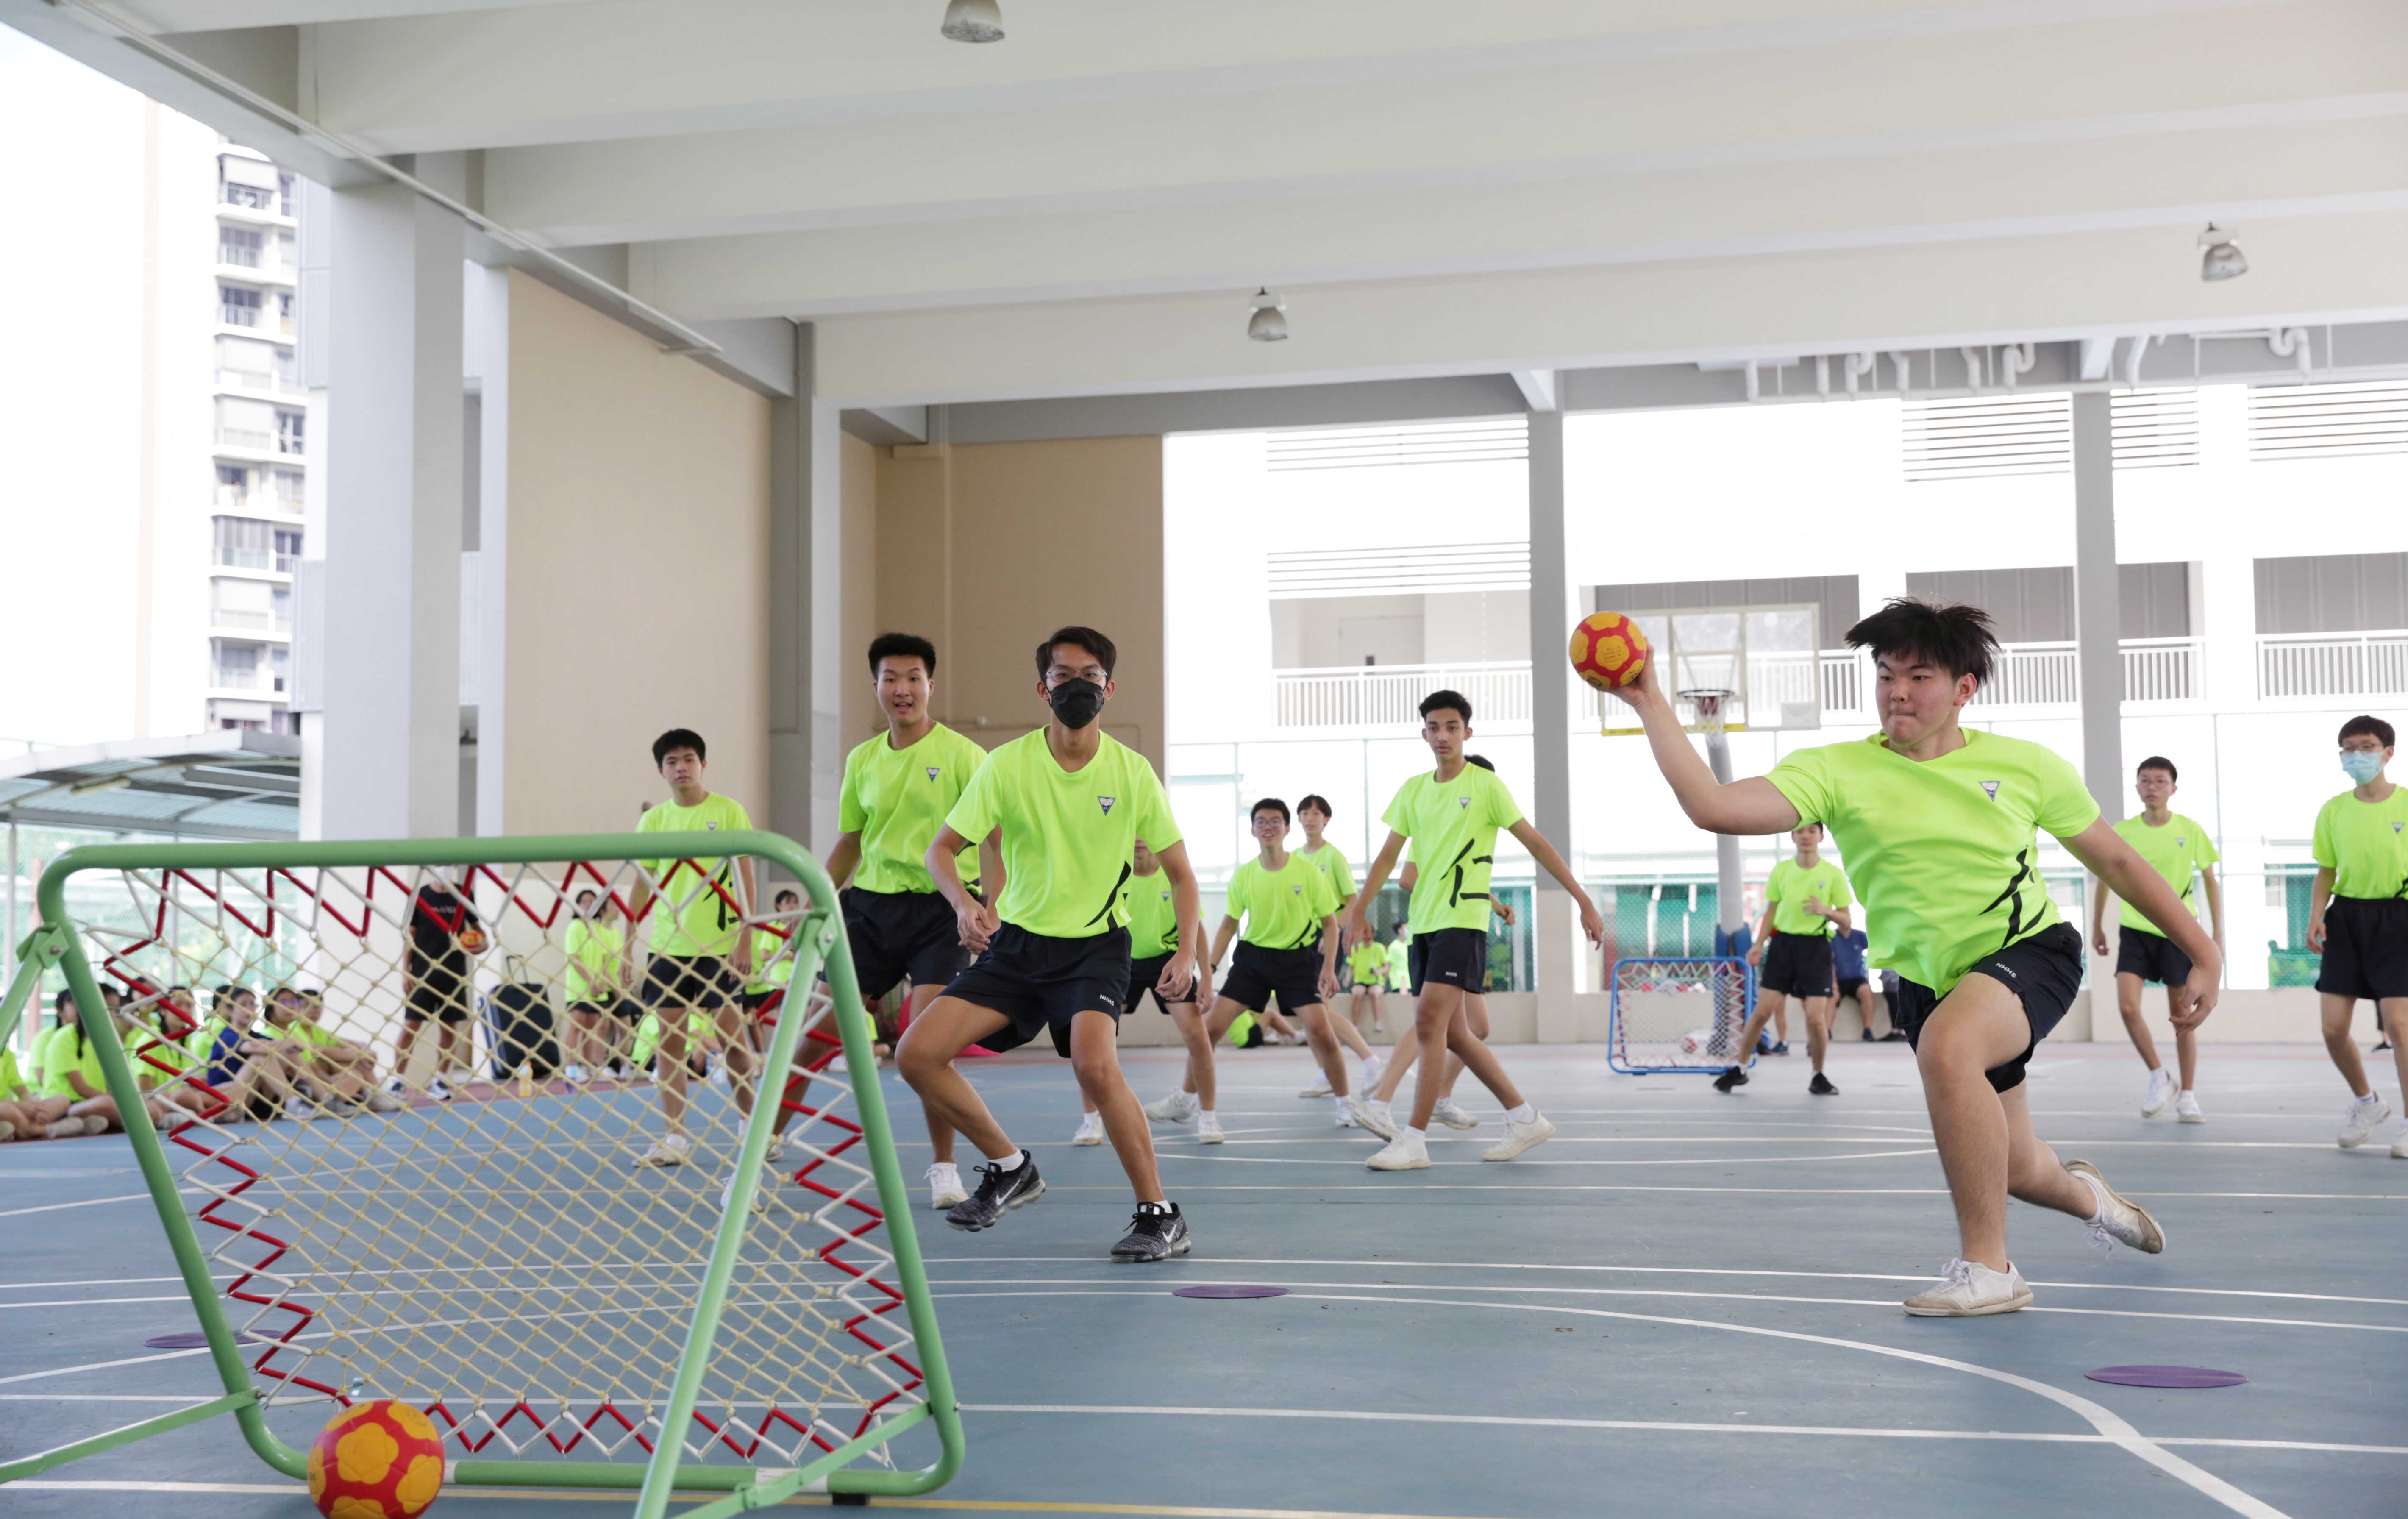 Going for the goal in Tchoukball